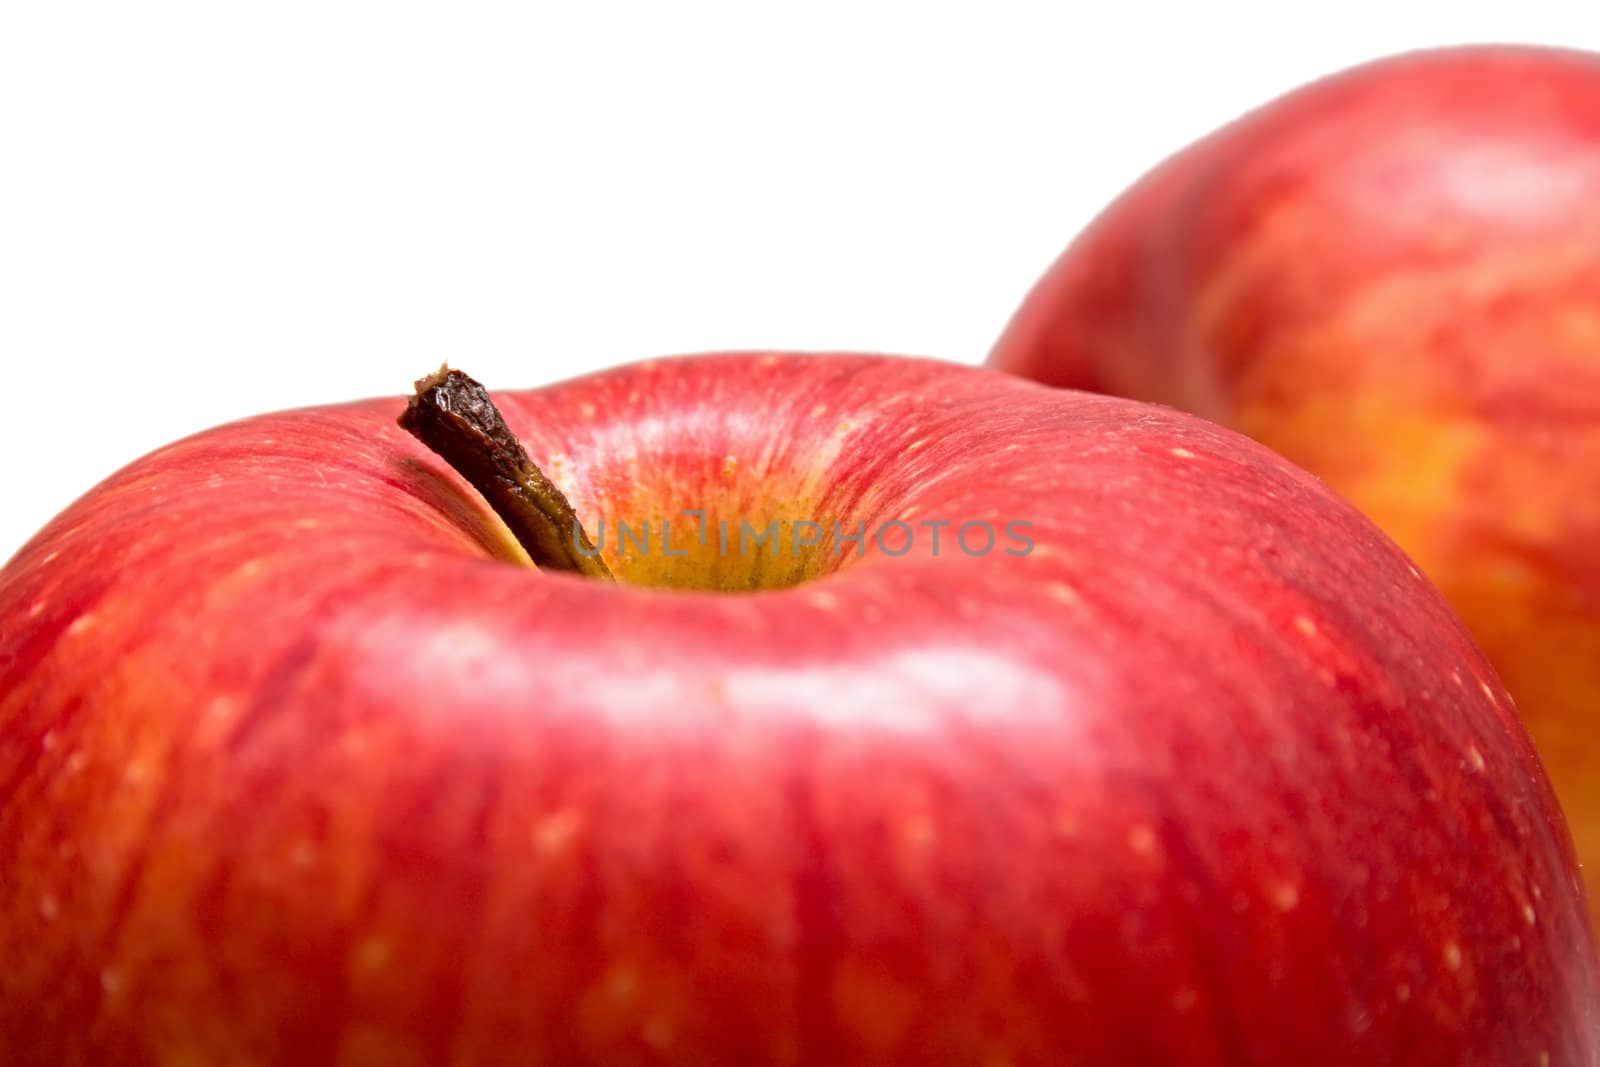 Fragment of red apples on the white background. Isolated. Shallow DOF.